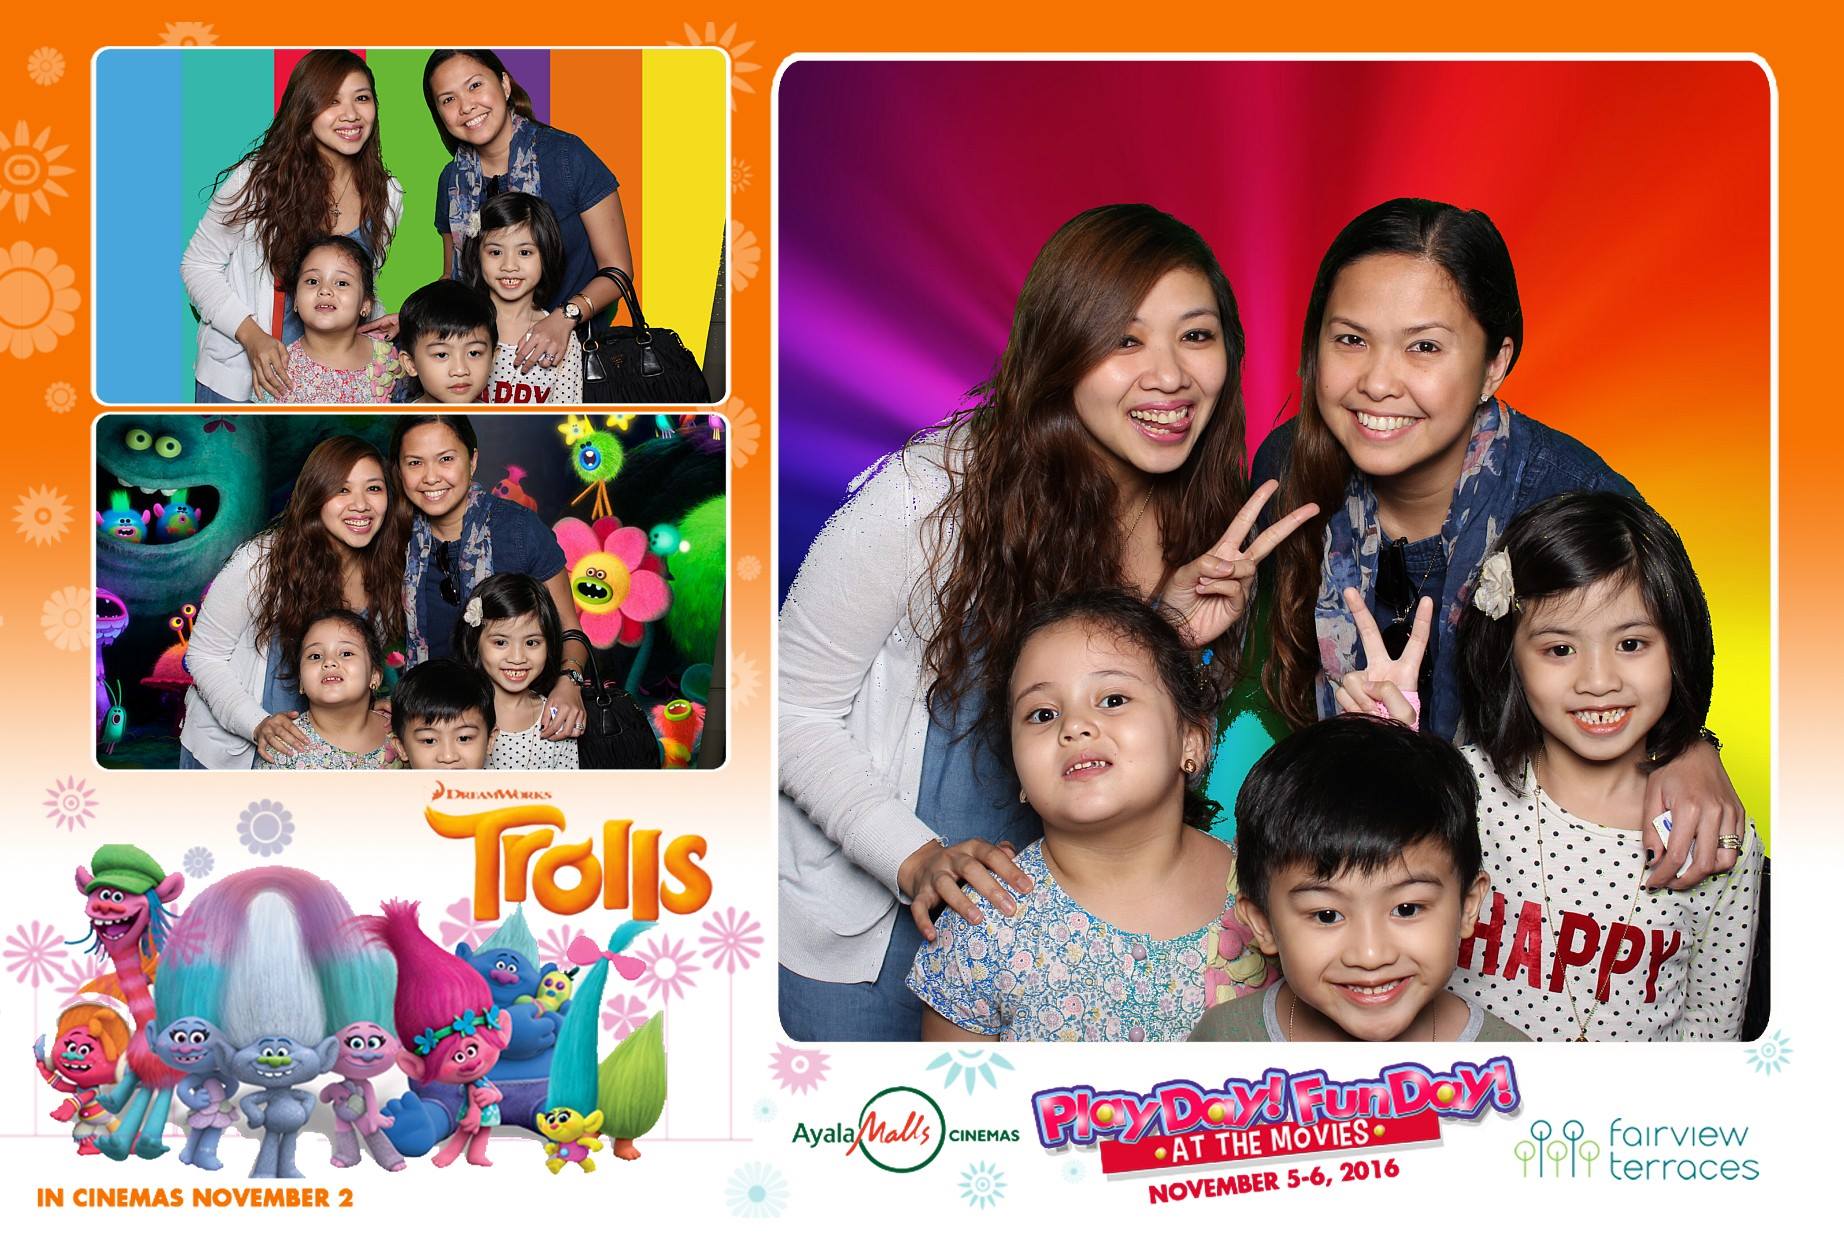 Play Day Fun Day @ Fairview Terraces Cinemas with Trolls